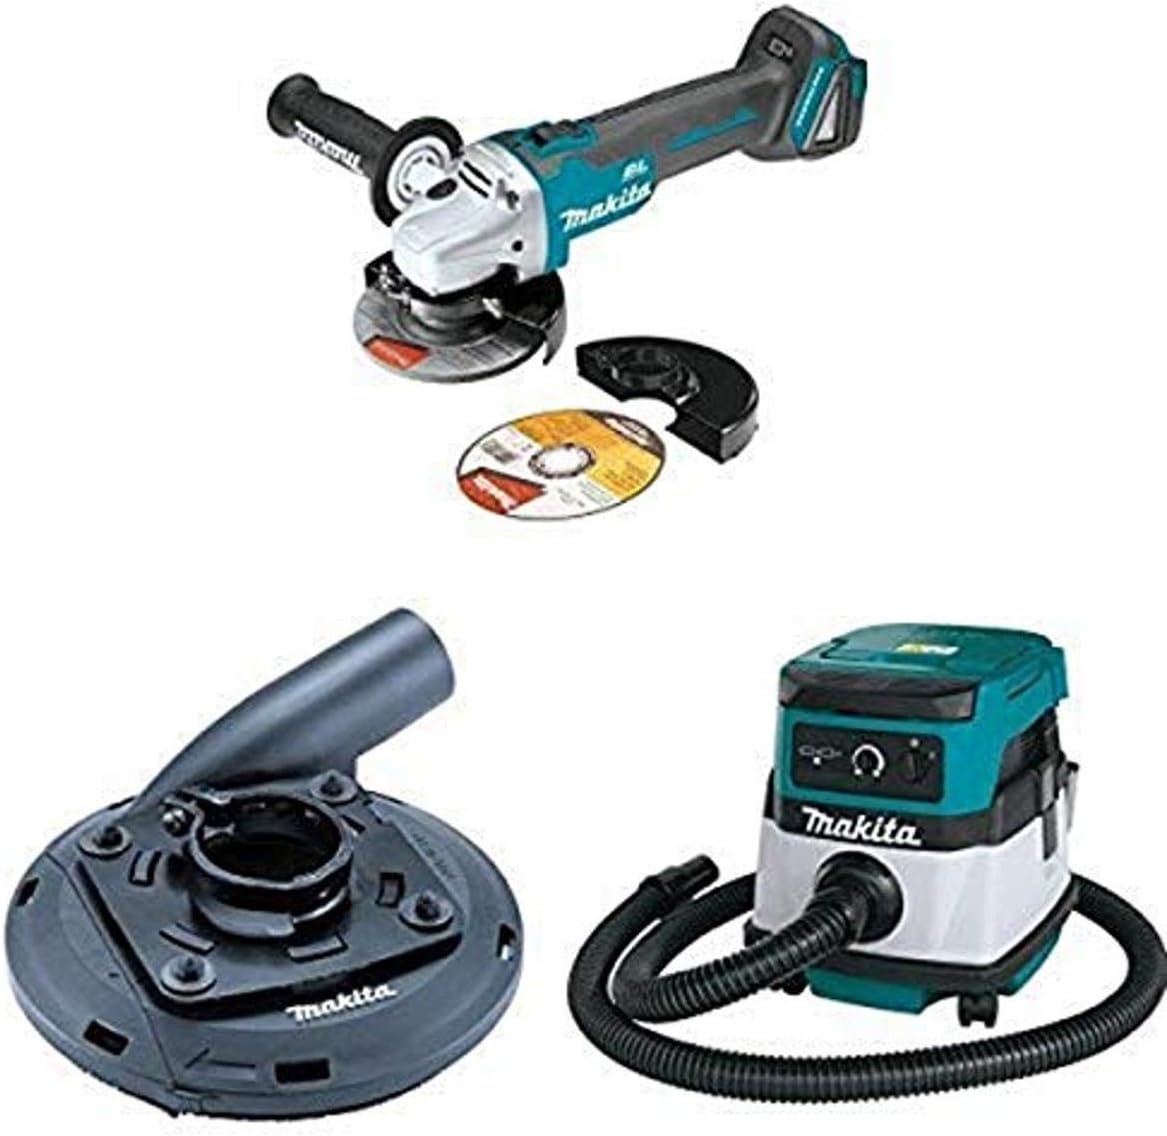 Makita XAG04Z 18V LXT Brushless Cordless 4-1/2-Inch - 5-Inch Cut-Off/Angle Grinder (Tool Only), 195236-5 Grinding Shroud,  XCV04Z 18V X2 LXT (36V) 2.1 Gallon HEPA Filter Dry Dust Extractor/Vacuum